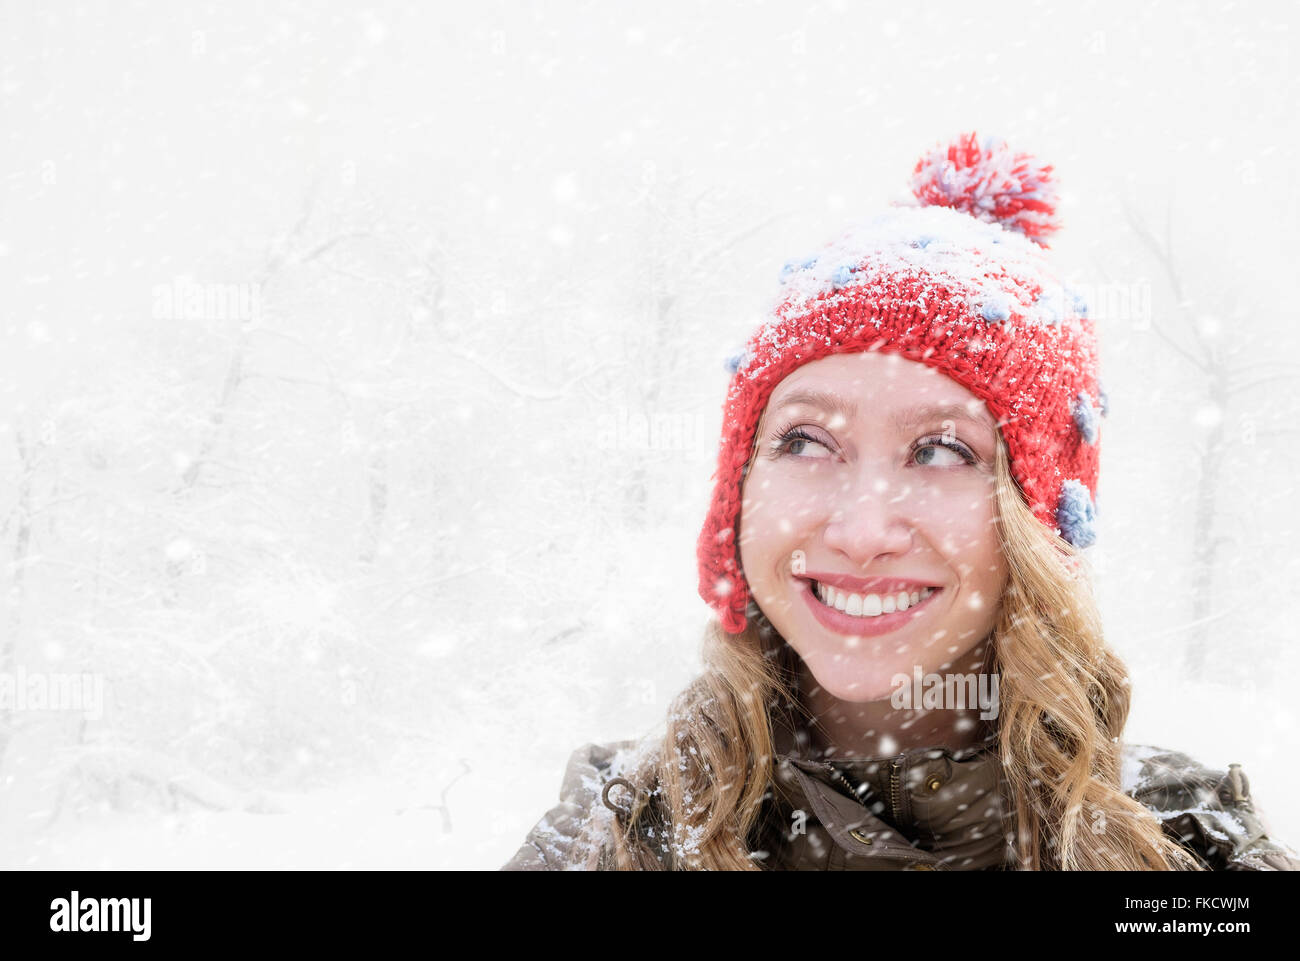 Woman in red knit hat looking away Stock Photo